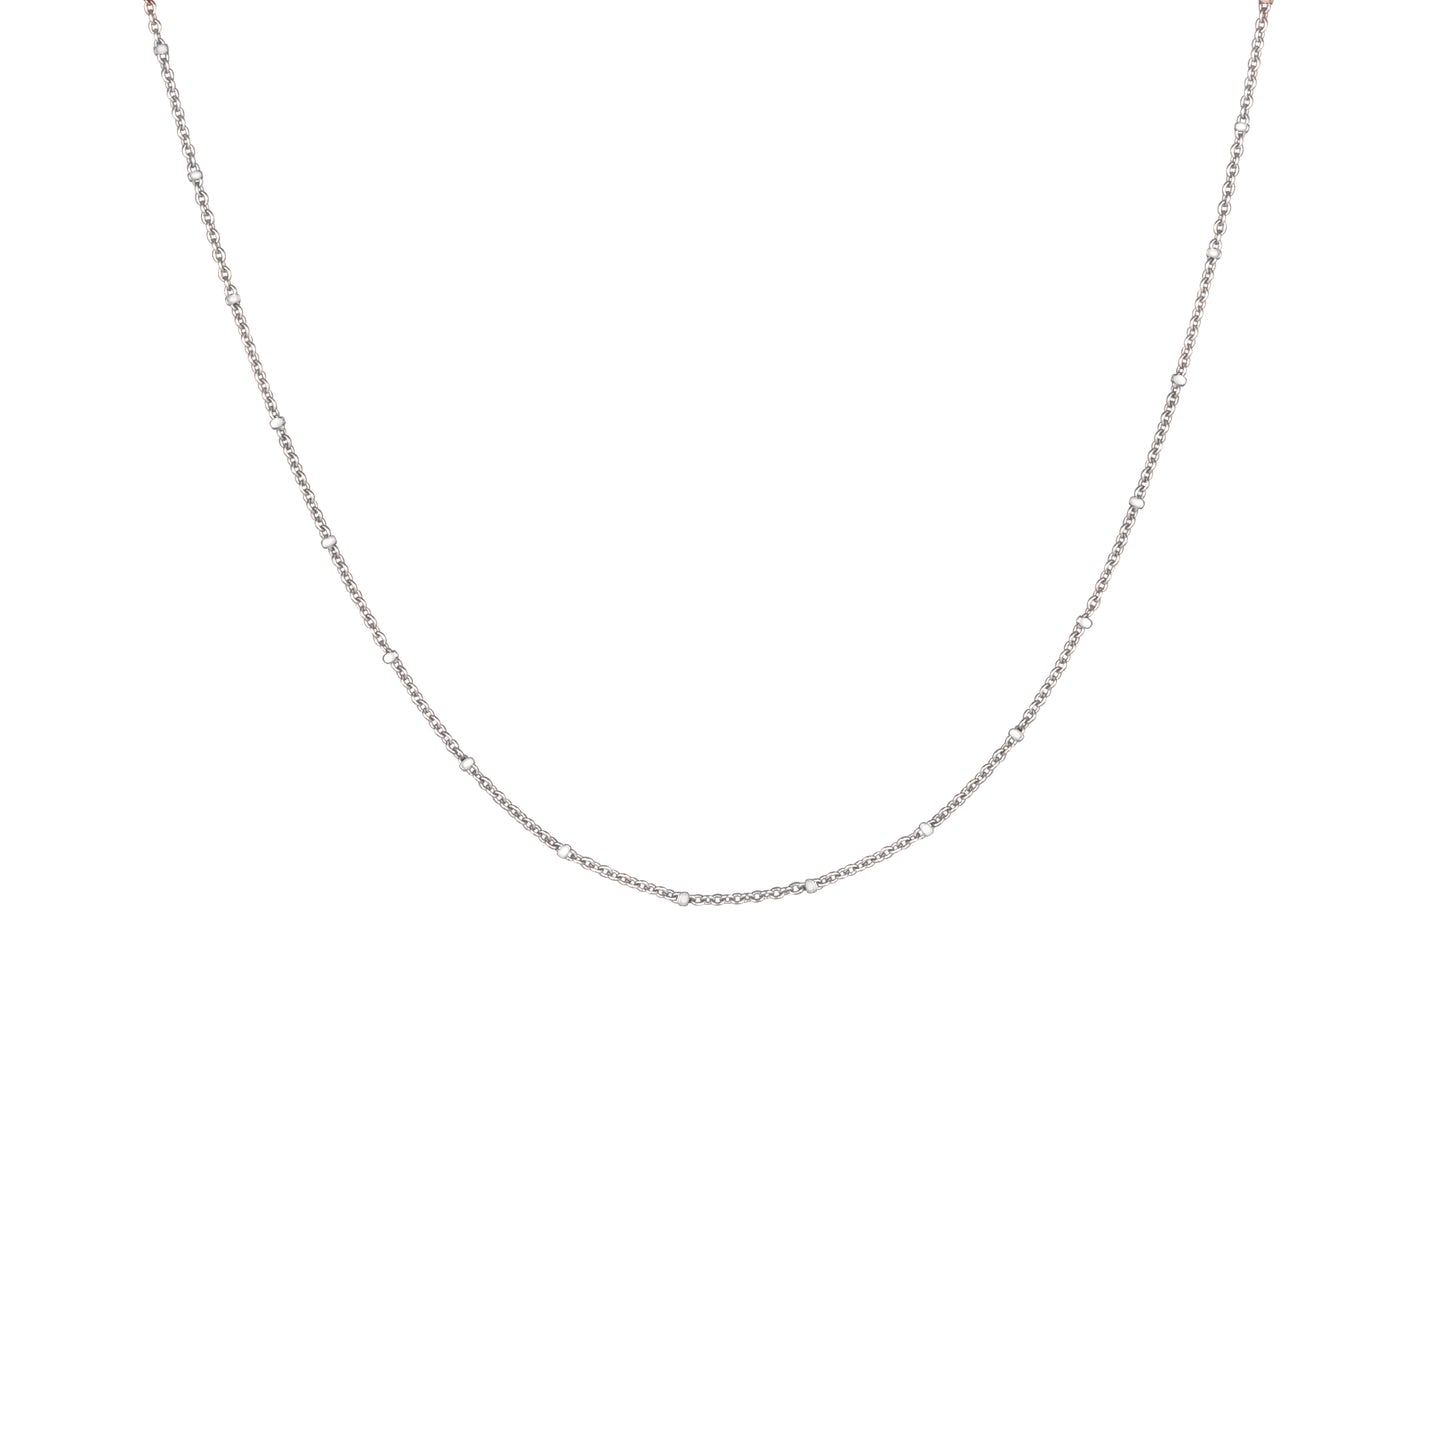 Satellite Chain Necklace in Solid 9k White Gold